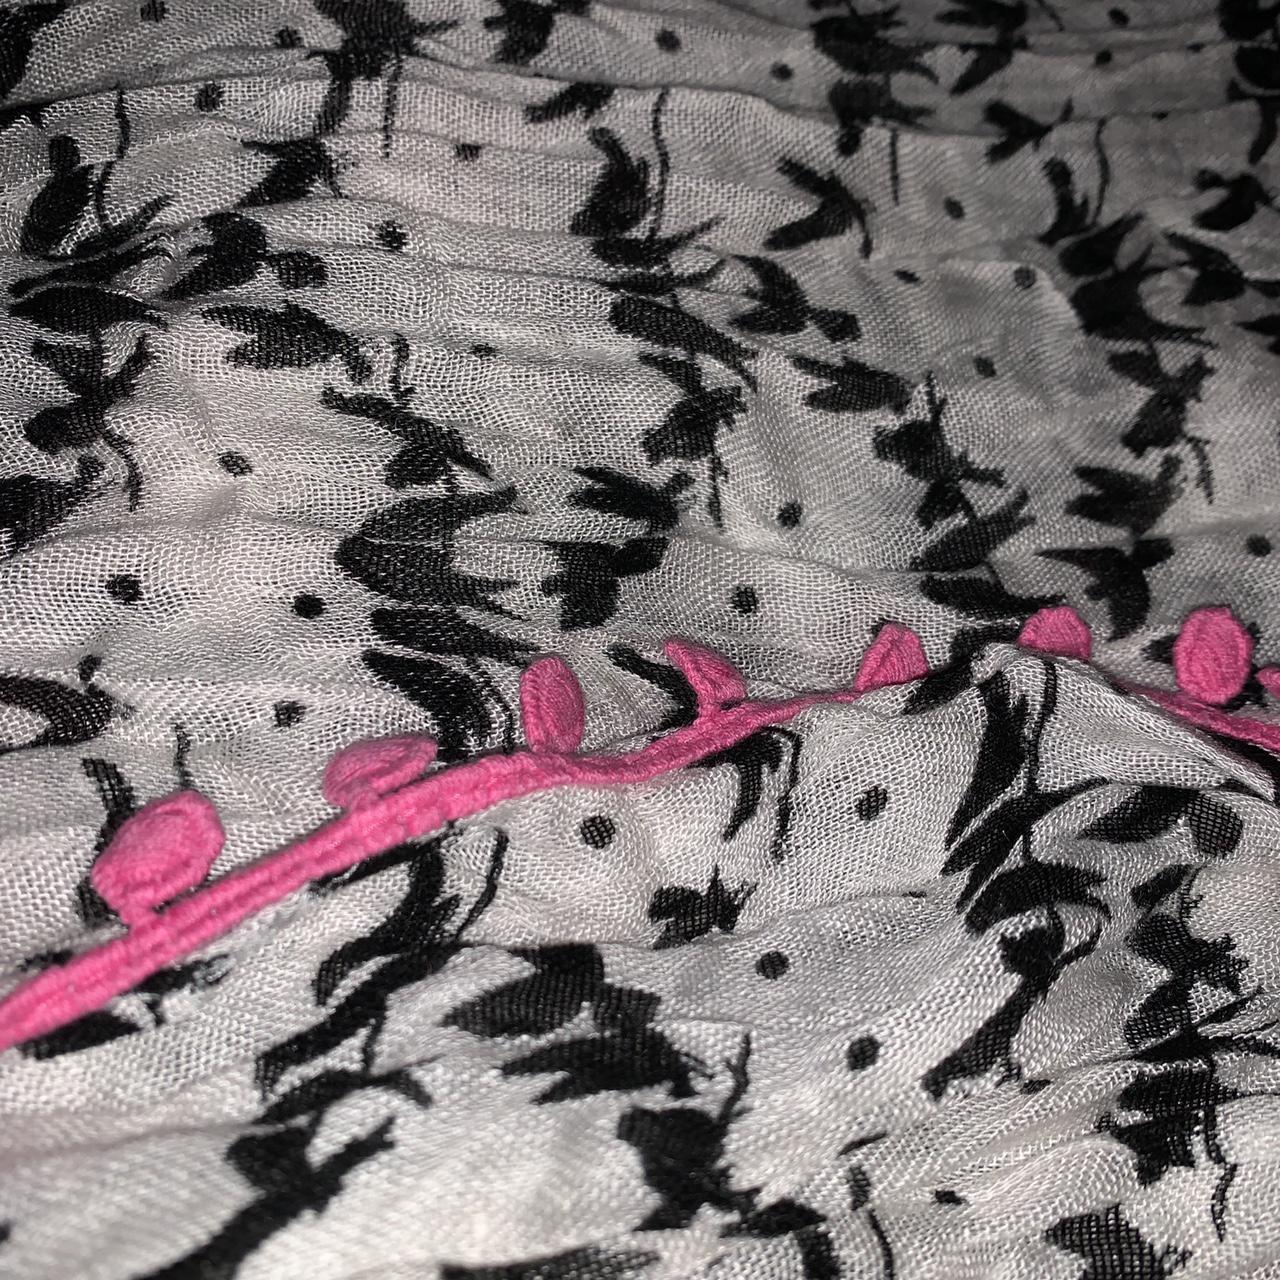 Product Image 2 - Aeropostale Black white and pink